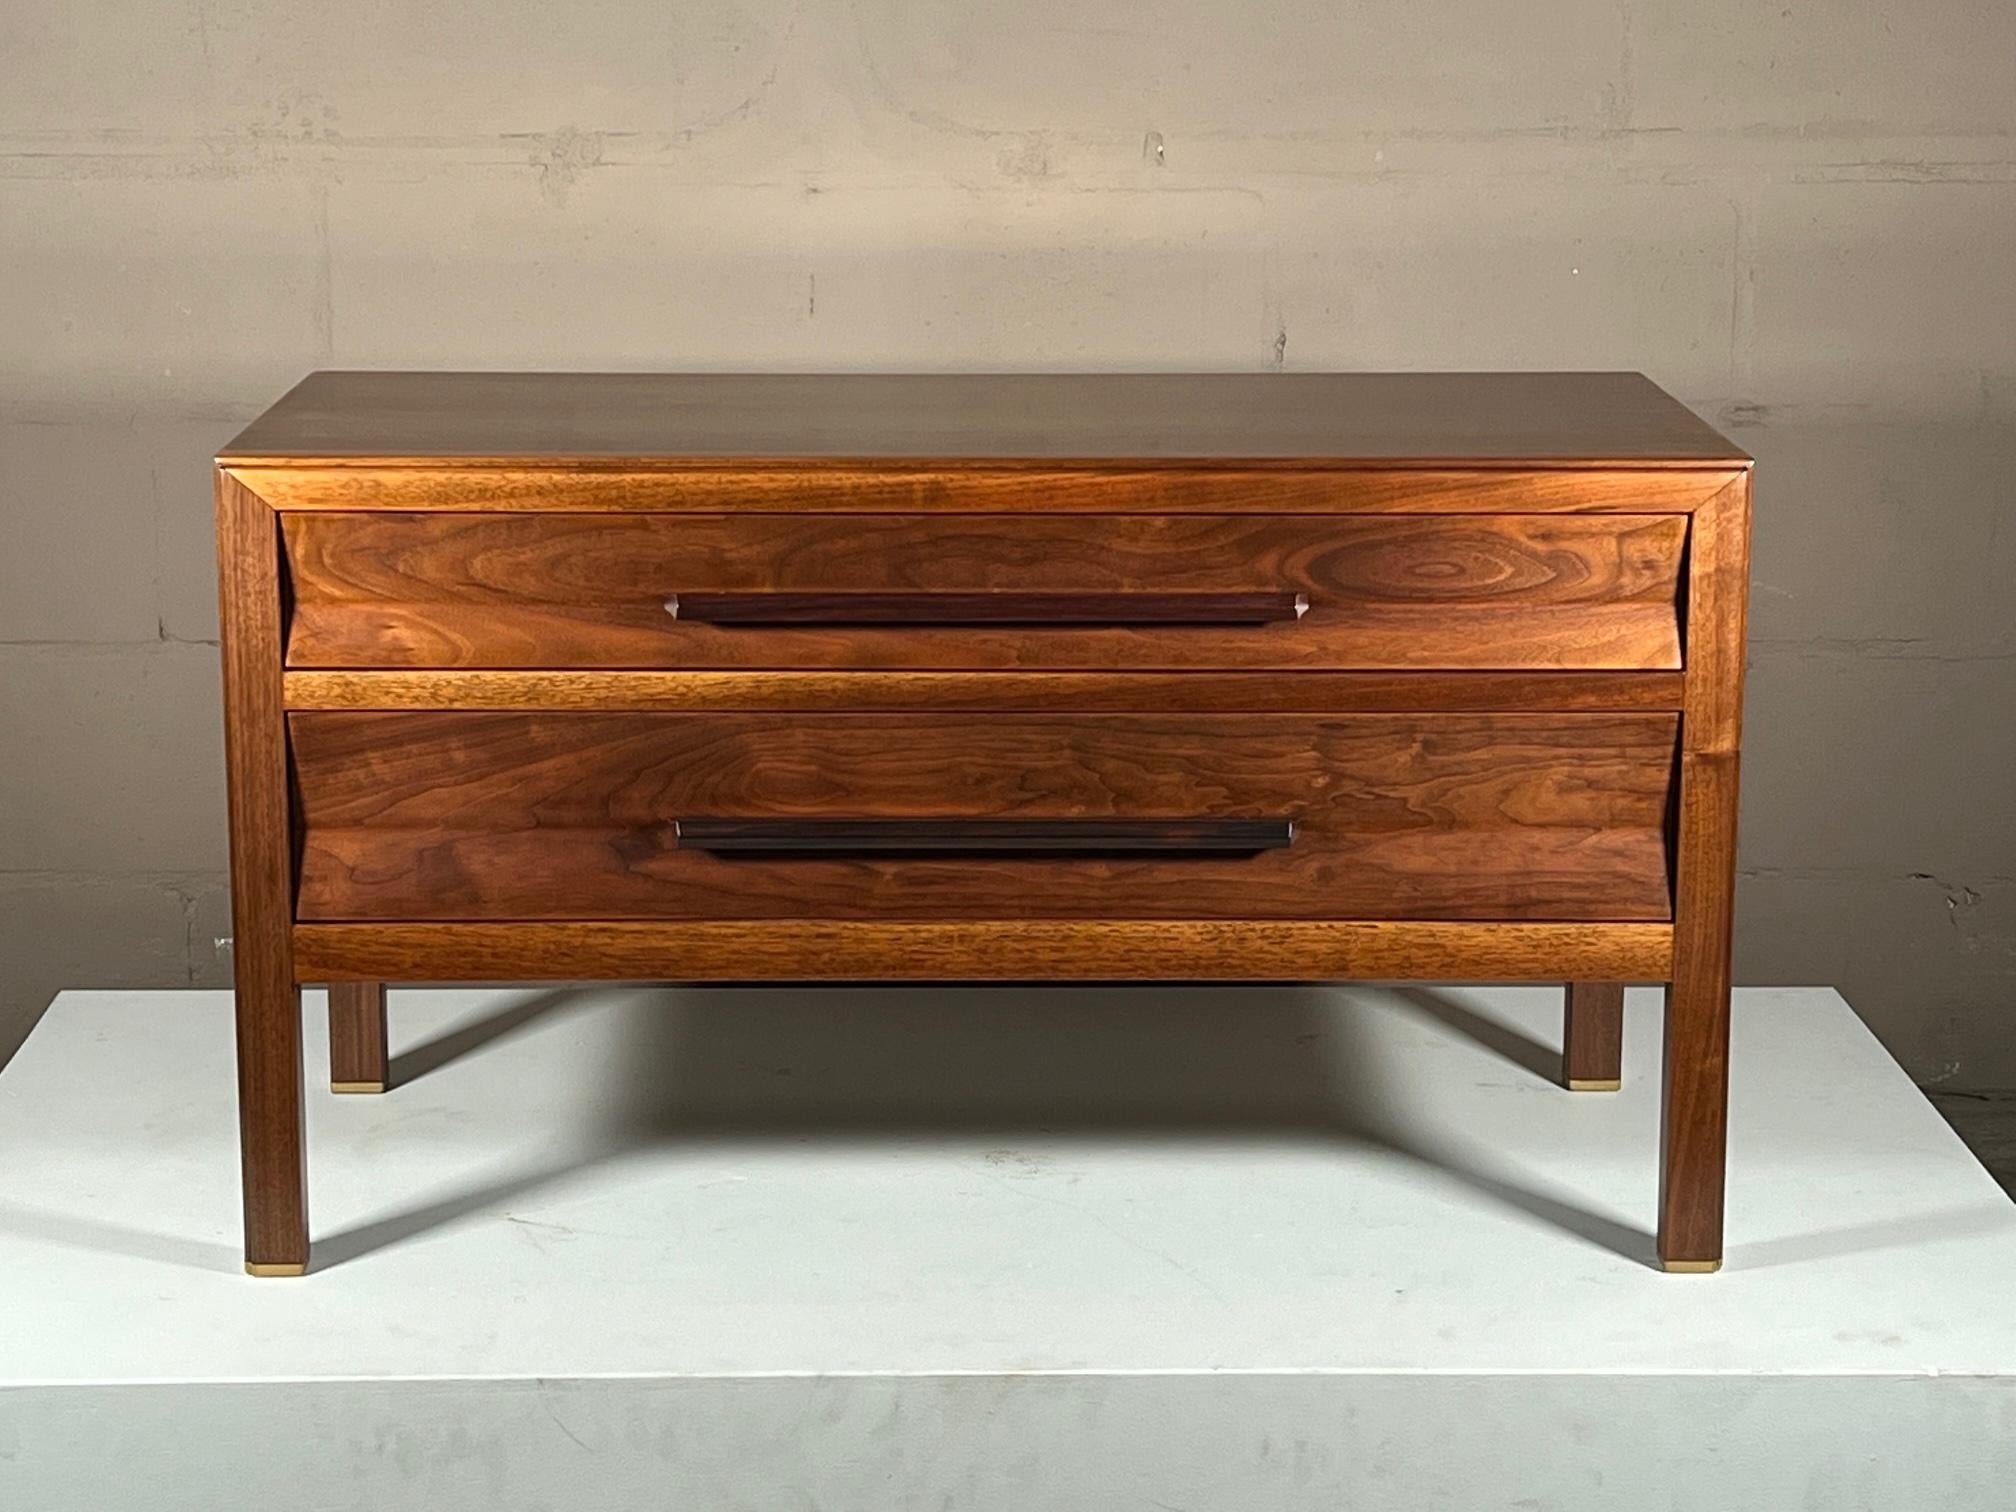 A beautiful low chest by Edward Wormley for Dunbar ca' 1960's. Walnut with excellent graining, floating long rosewood handles with a sculpted design, brass sabots. The cabinet's back is finished-so it can be placed anywhere in the room. Note the